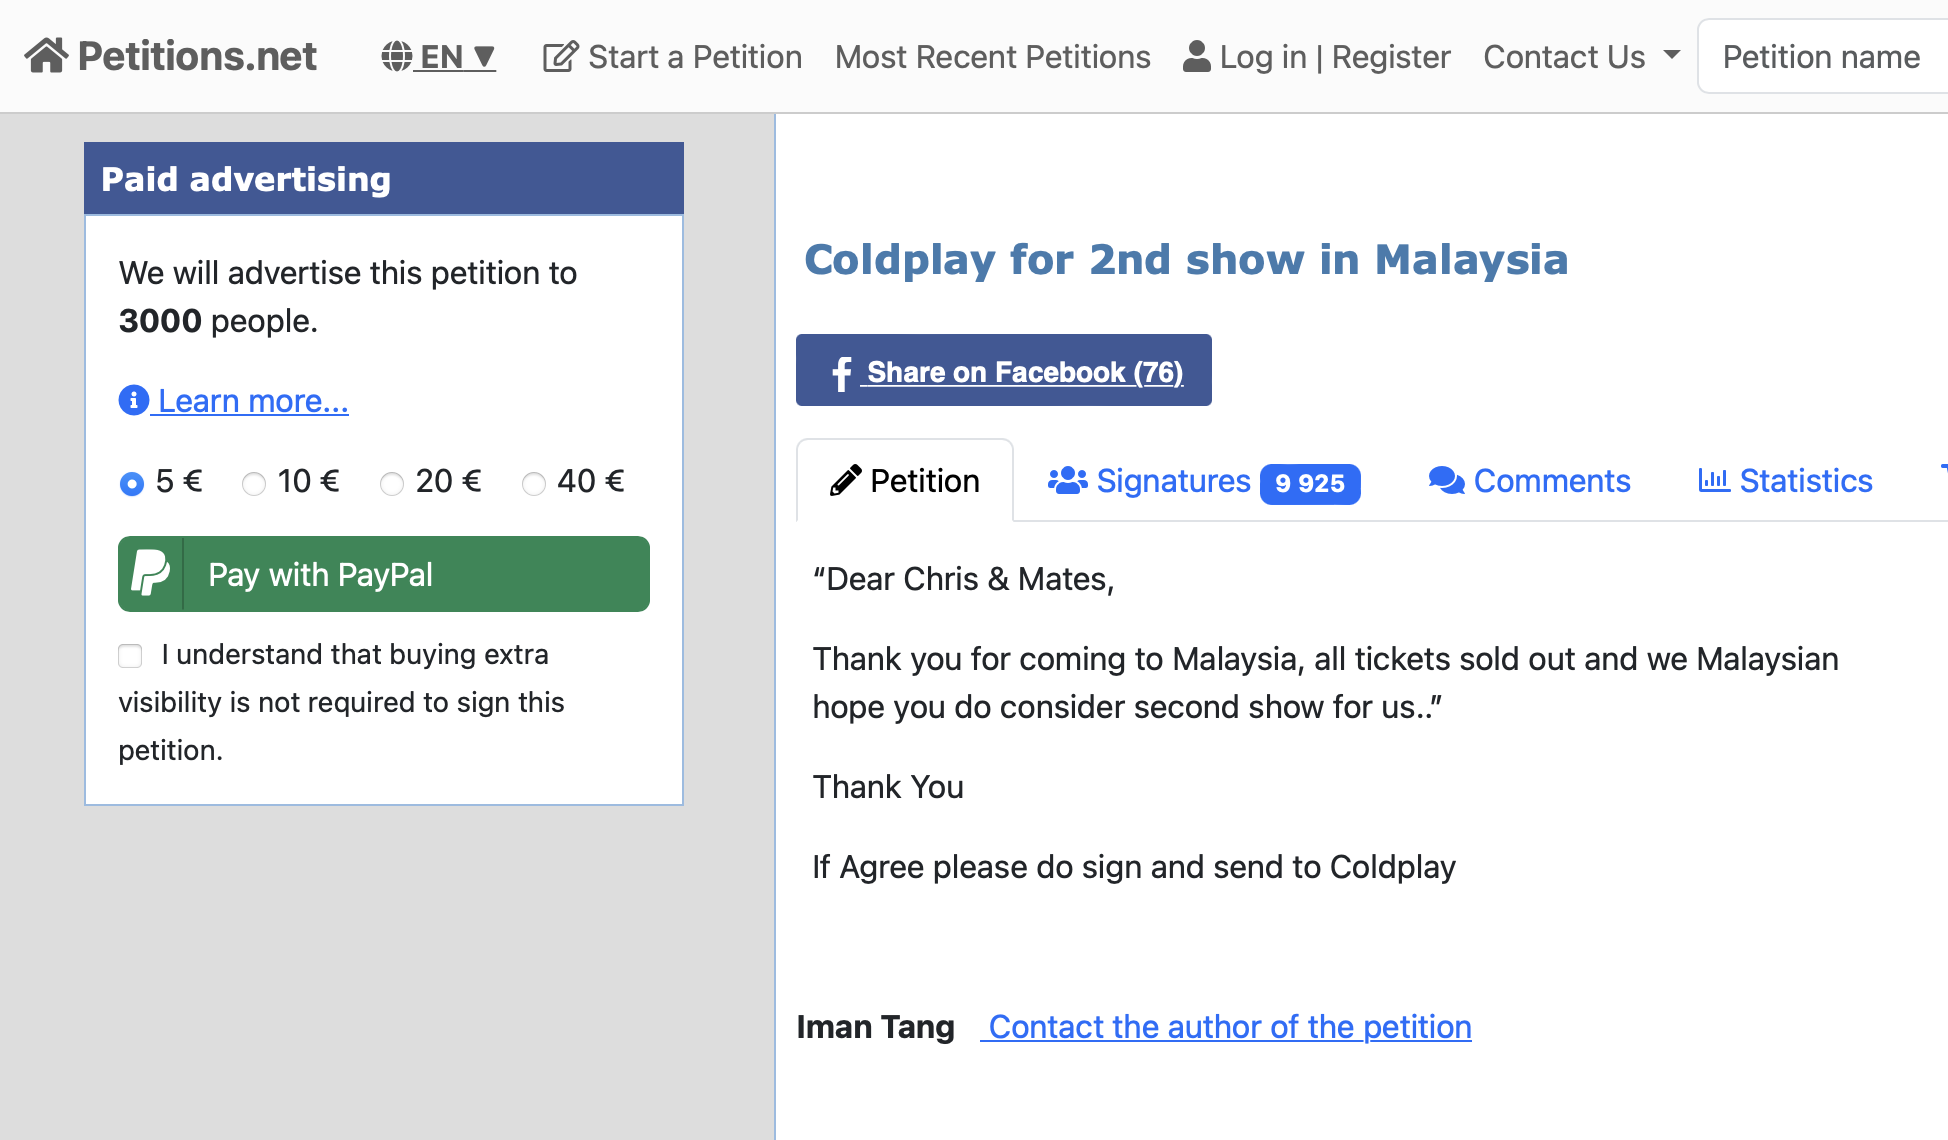 Petition asking coldplay to add second date to its m'sian concert receives over 10,000 signatures within 48 hours | weirdkaya